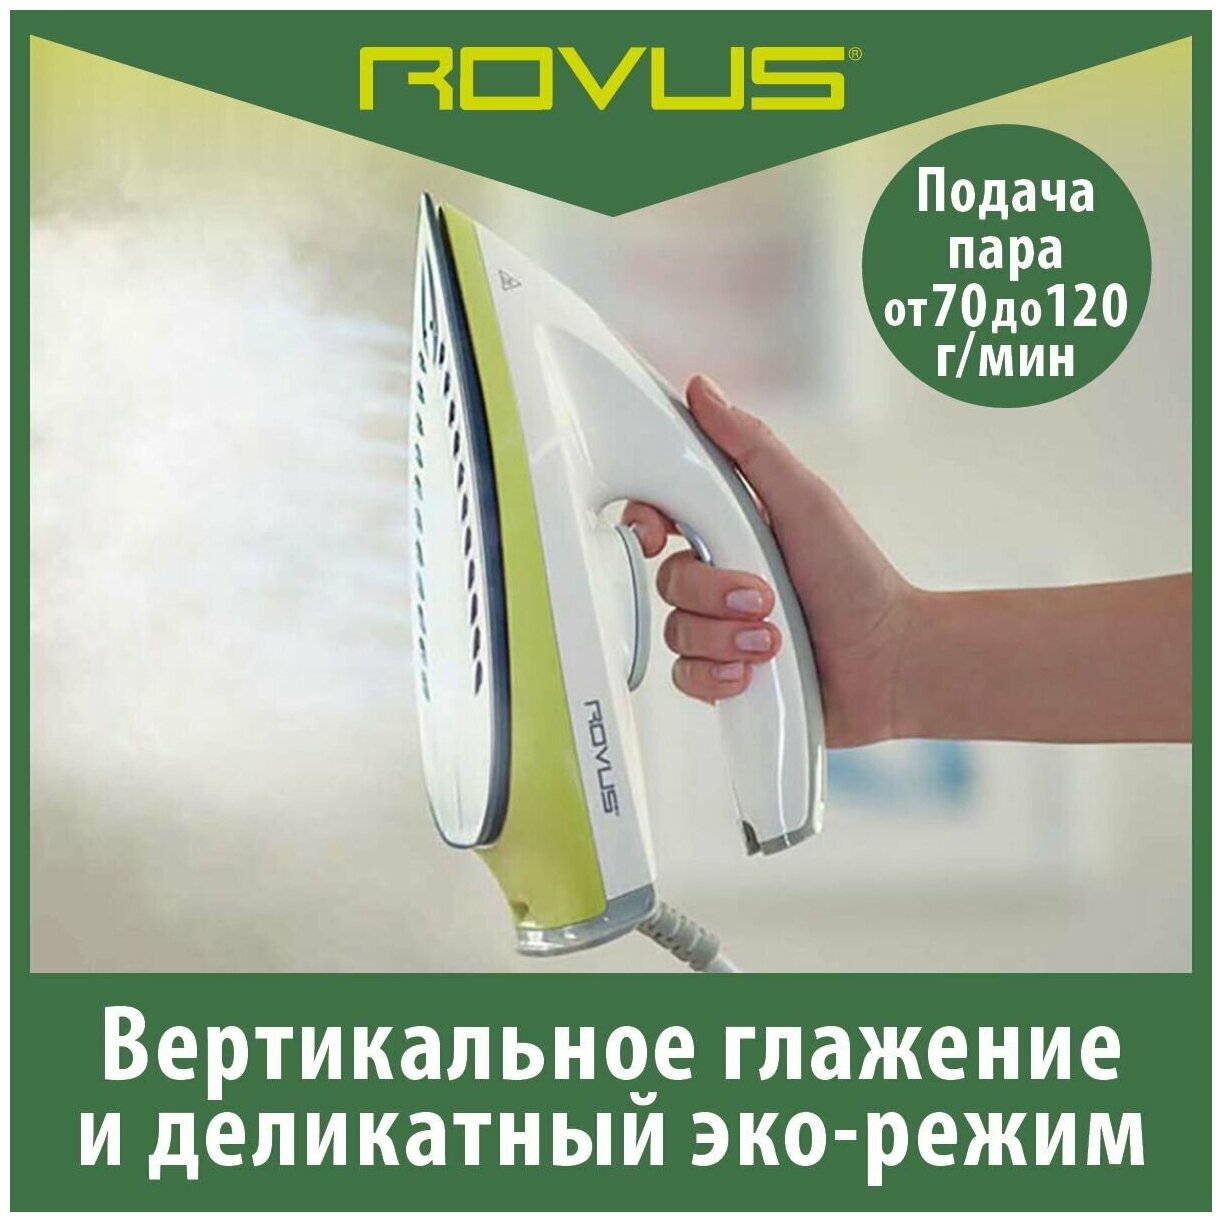 Gold rovus multipurpose steam station 19 in 1 фото 11